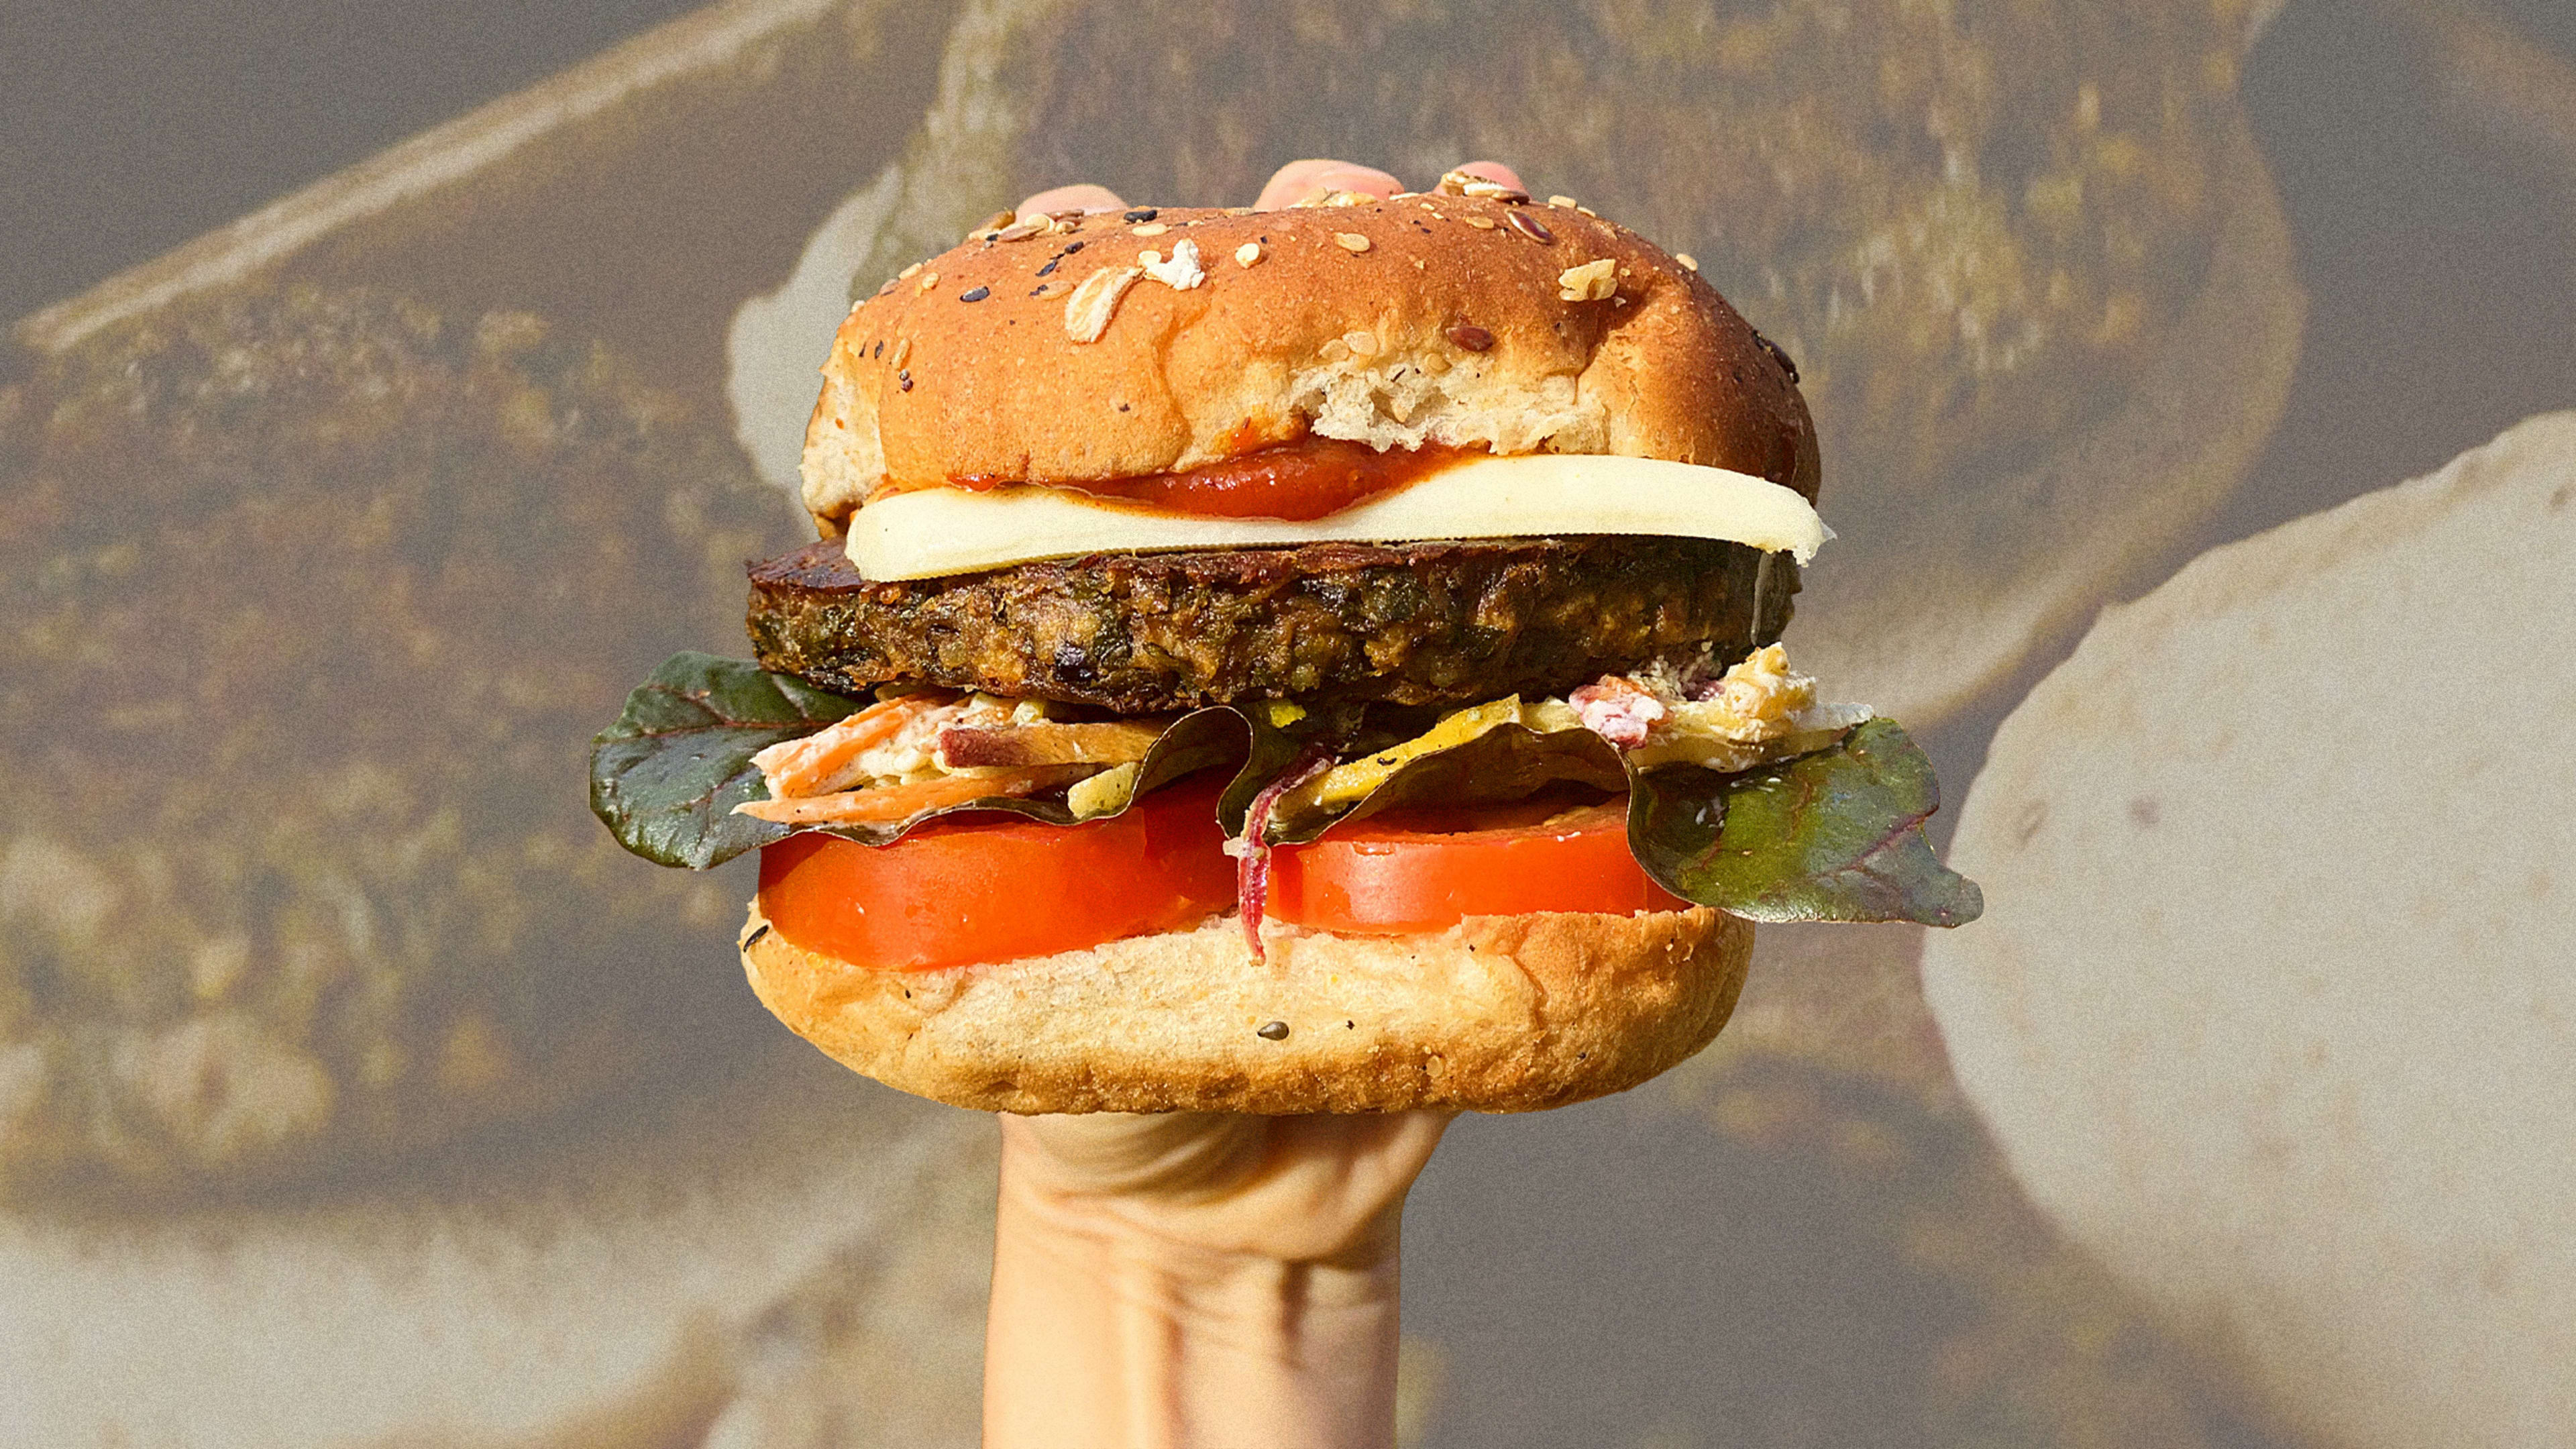 The main ingredient in this burger doesn’t require land or fresh water to produce: It’s kelp